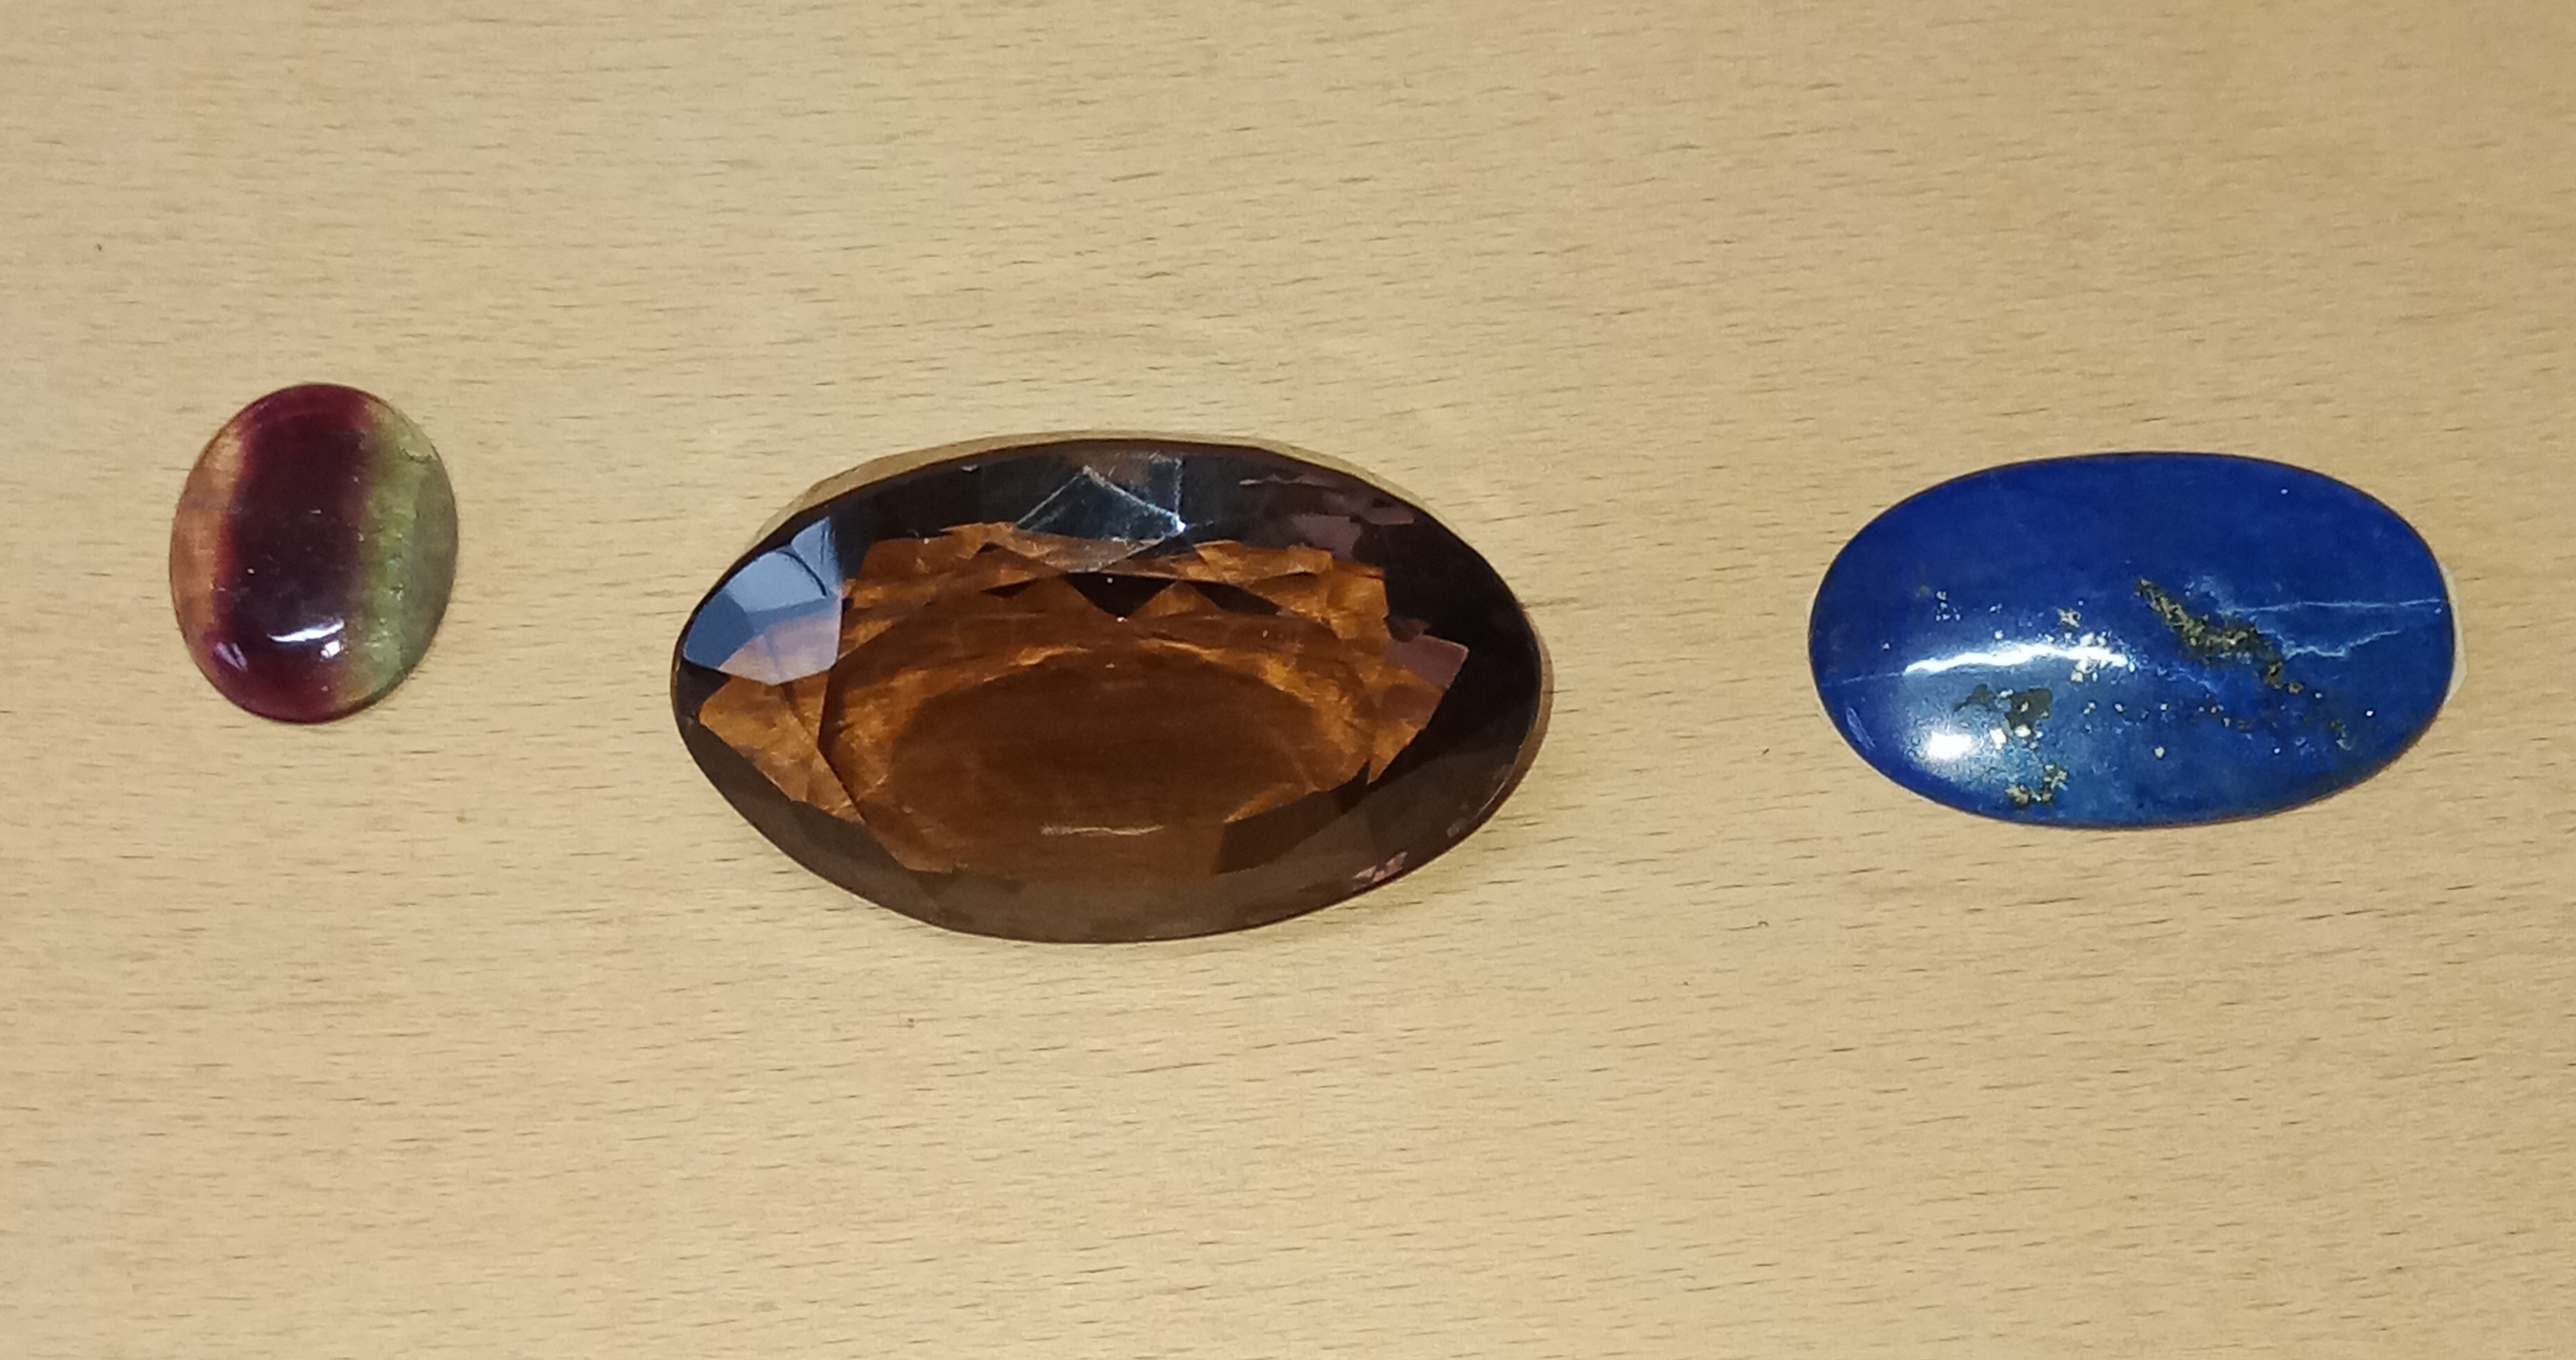 Cabochon and facetted stones